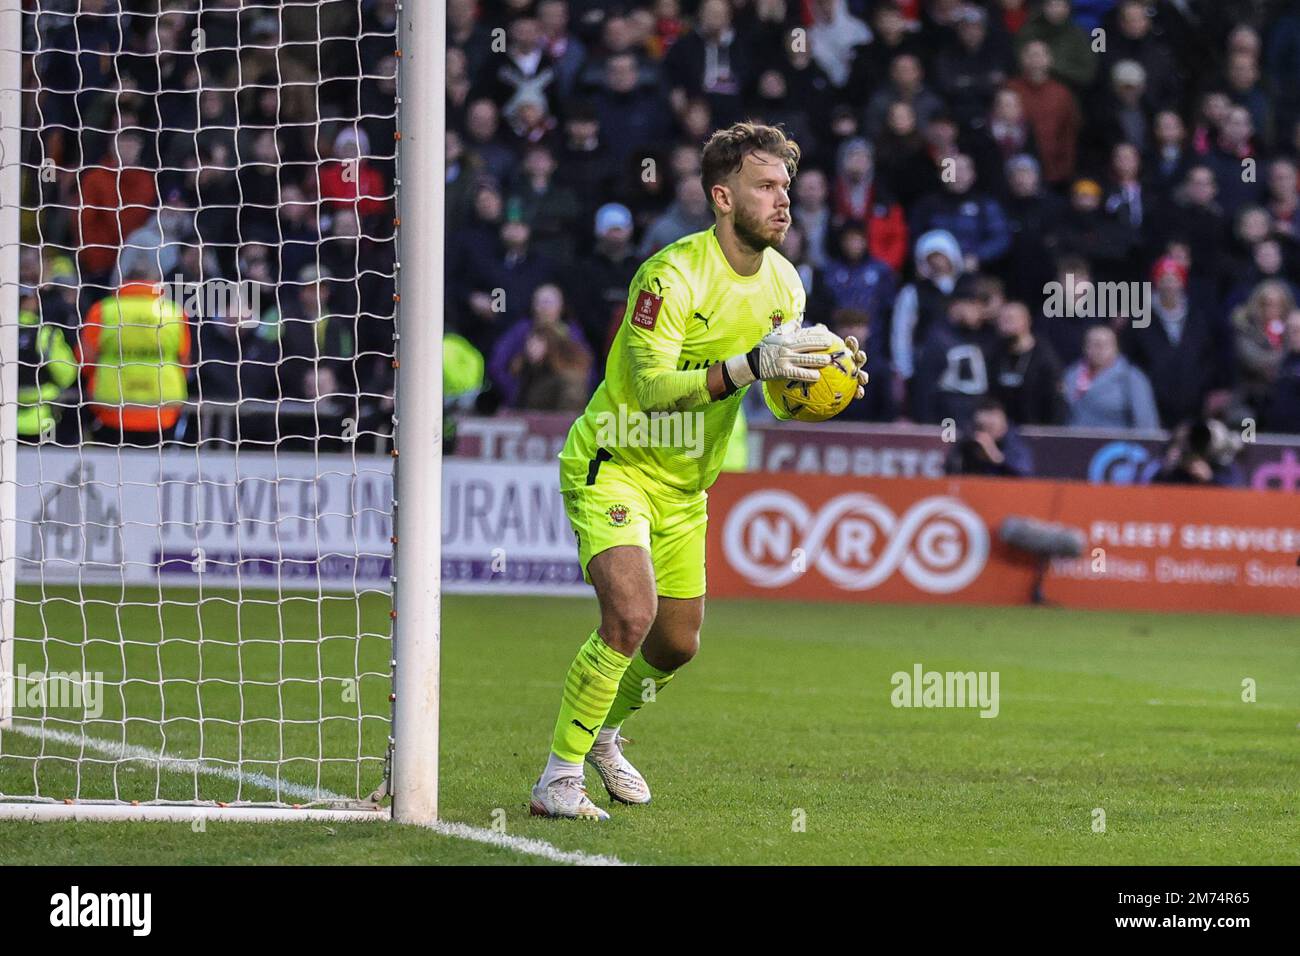 Blackpool, UK. 07th Jan, 2023. Chris Maxwell #1 of Blackpool saves a shot from Sam Surridge #16 of Nottingham Forest during the Emirates FA Cup Third Round match Blackpool vs Nottingham Forest at Bloomfield Road, Blackpool, United Kingdom, 7th January 2023 (Photo by Mark Cosgrove/News Images) in Blackpool, United Kingdom on 1/7/2023. (Photo by Mark Cosgrove/News Images/Sipa USA) Credit: Sipa USA/Alamy Live News Stock Photo